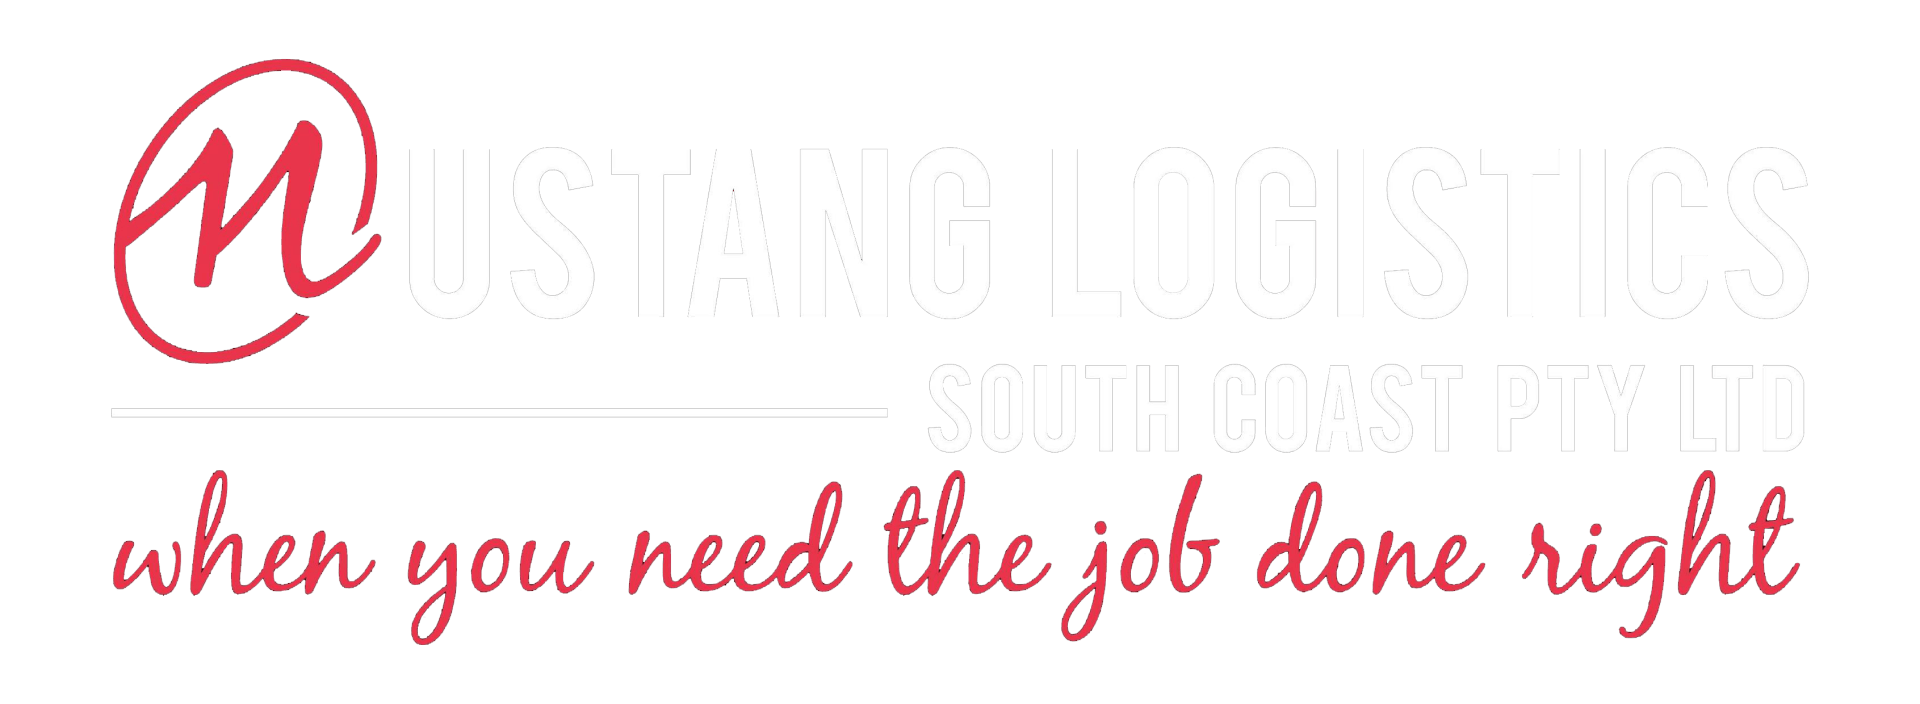 Mustang Logistics South Coast—Transport Services in Nowra